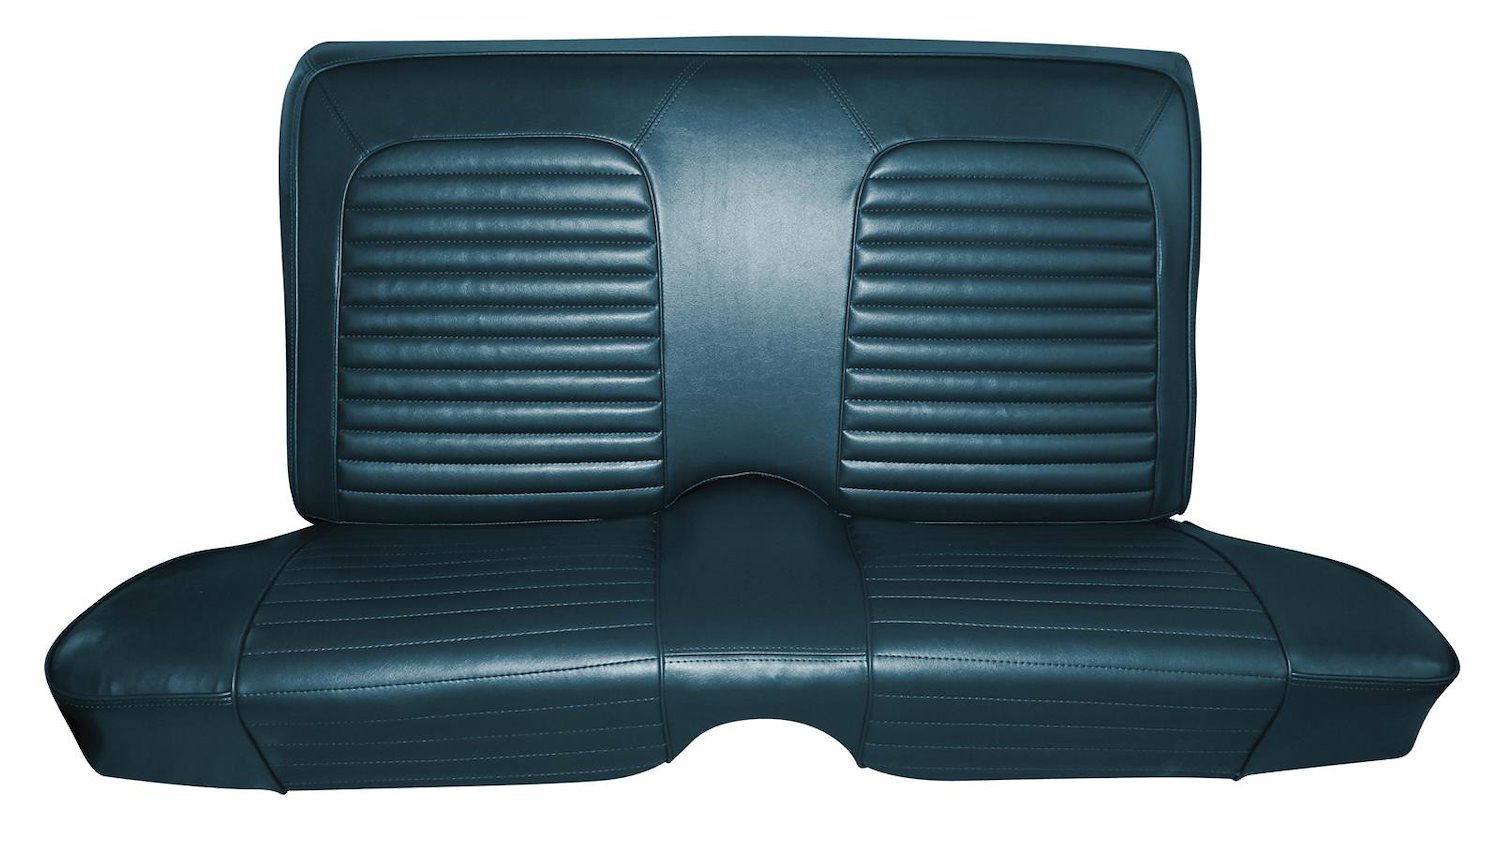 1965 Ford Fairlane 500 2-Door Hardtop Interior Two-Tone Rear Bench Seat Upholstery Set